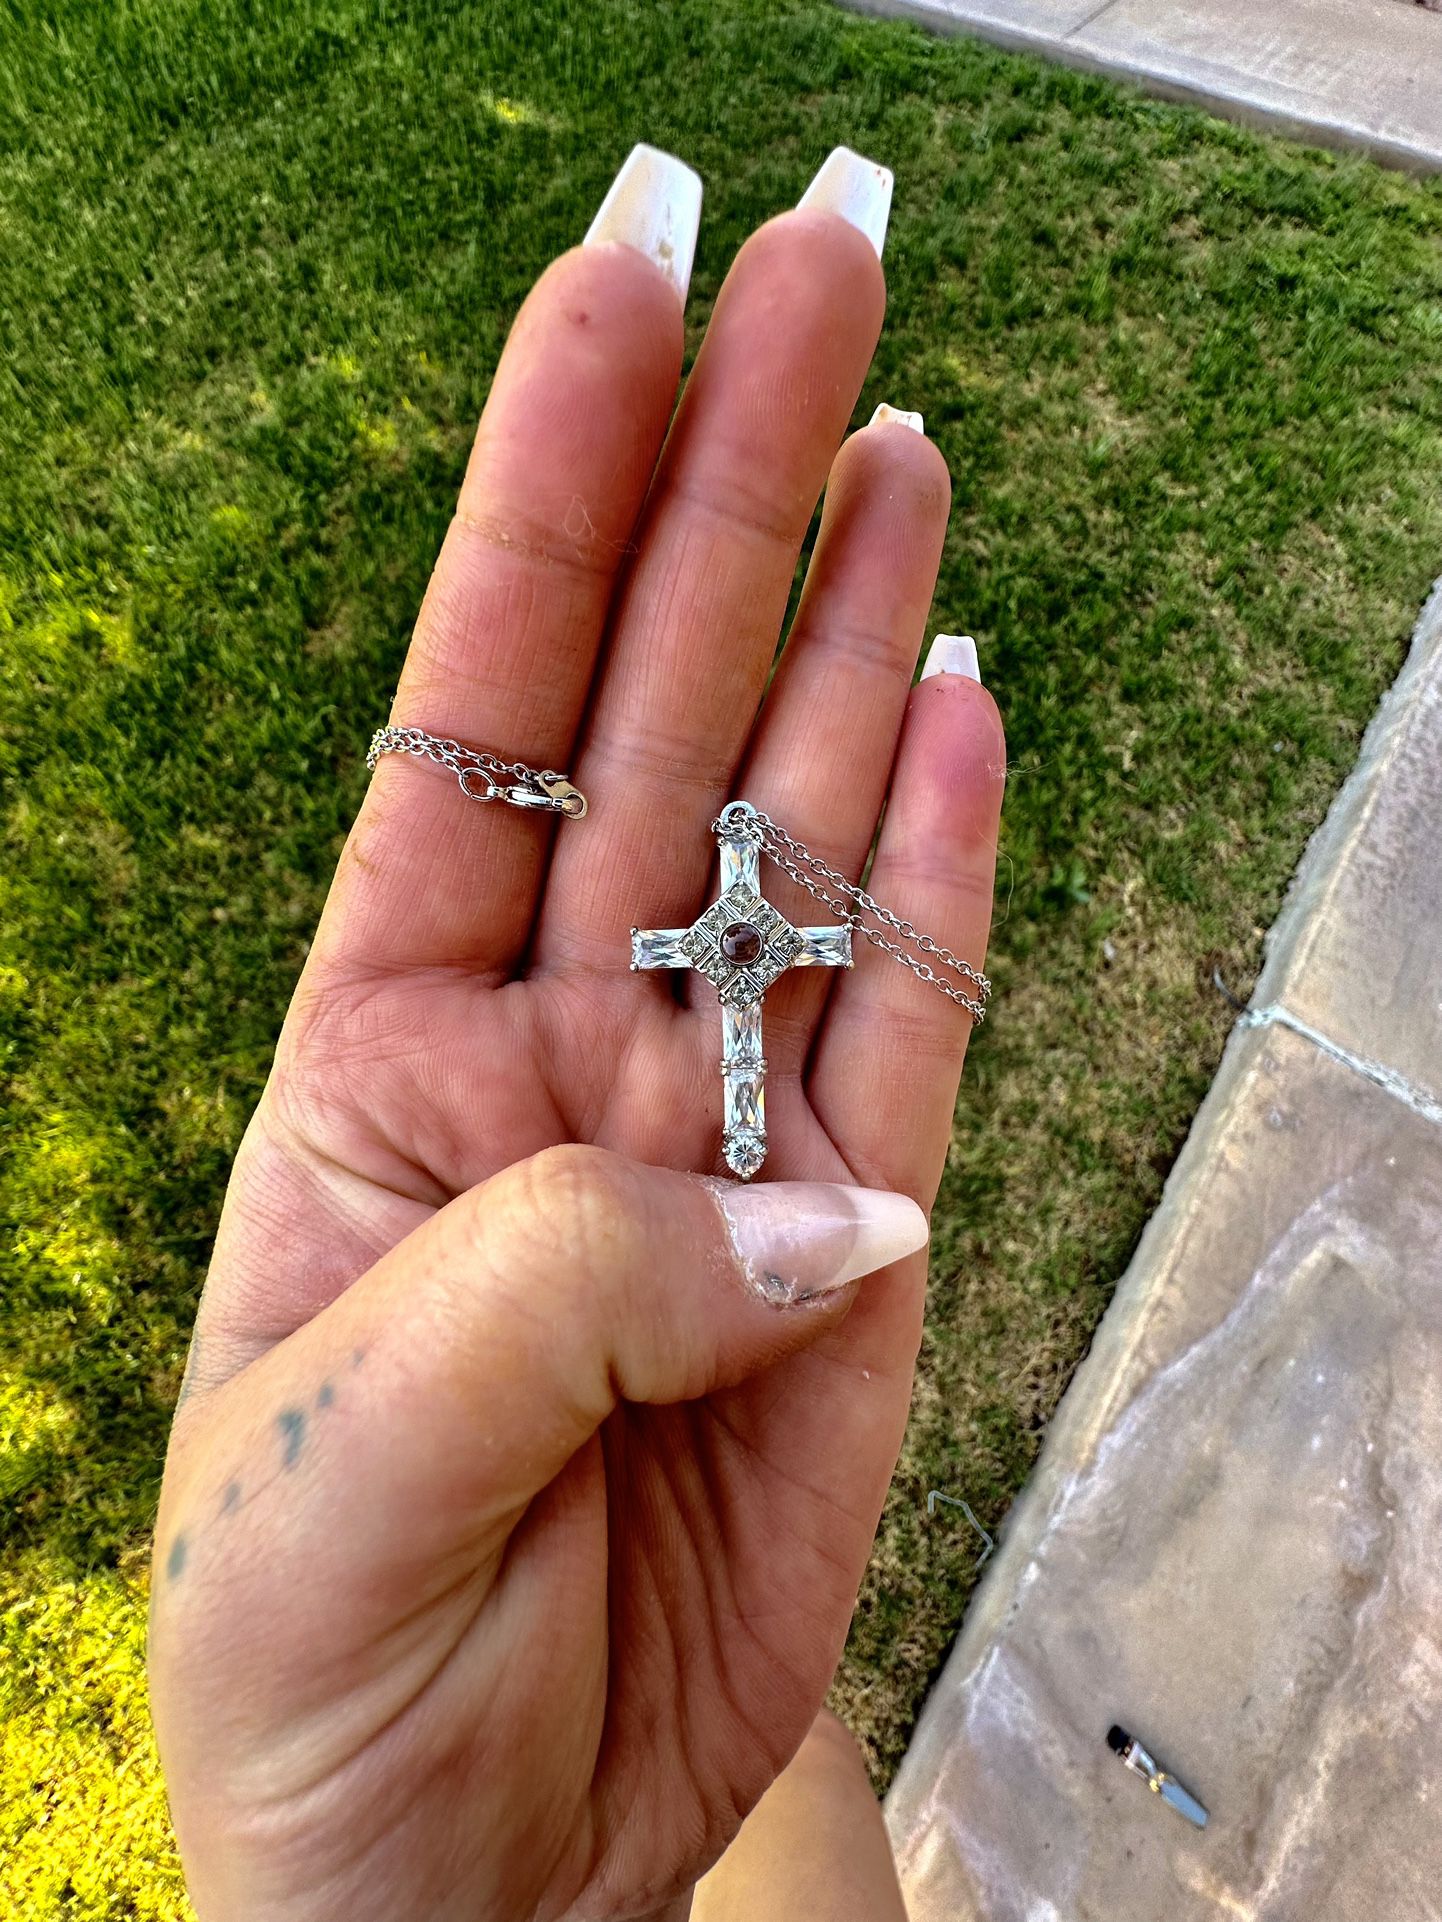 The Lords Prayer Sterling Silver Cross FAITH GORGEOUS New